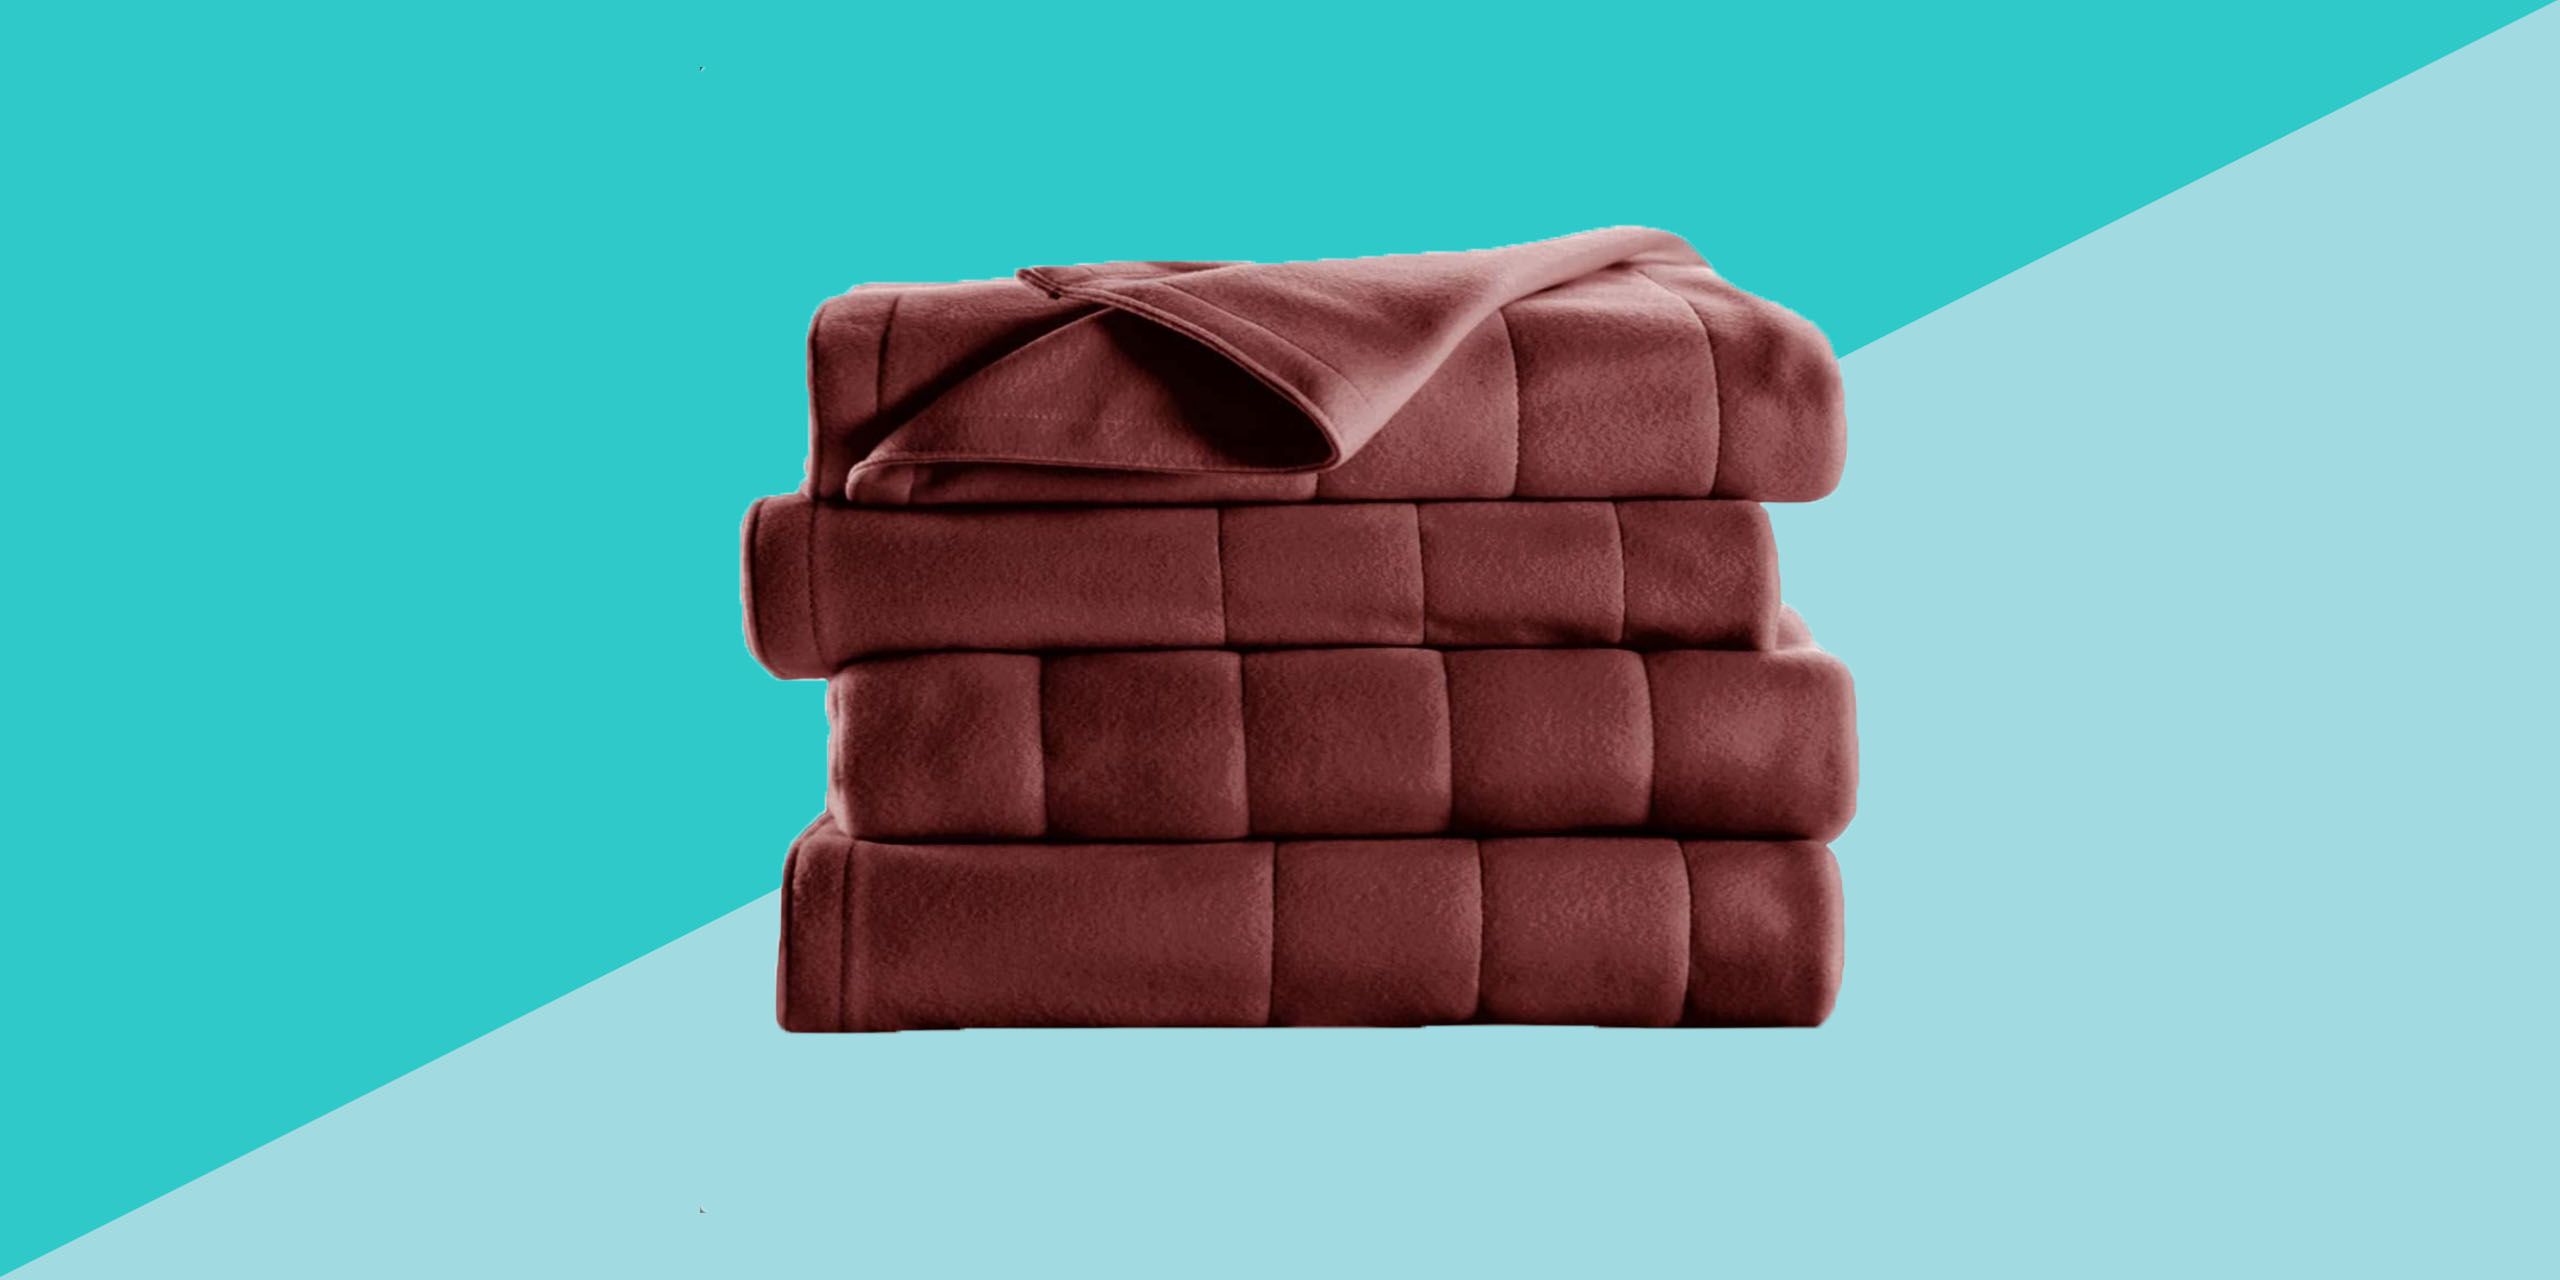 What We Know About the Bedsure Heated Blanket Recall